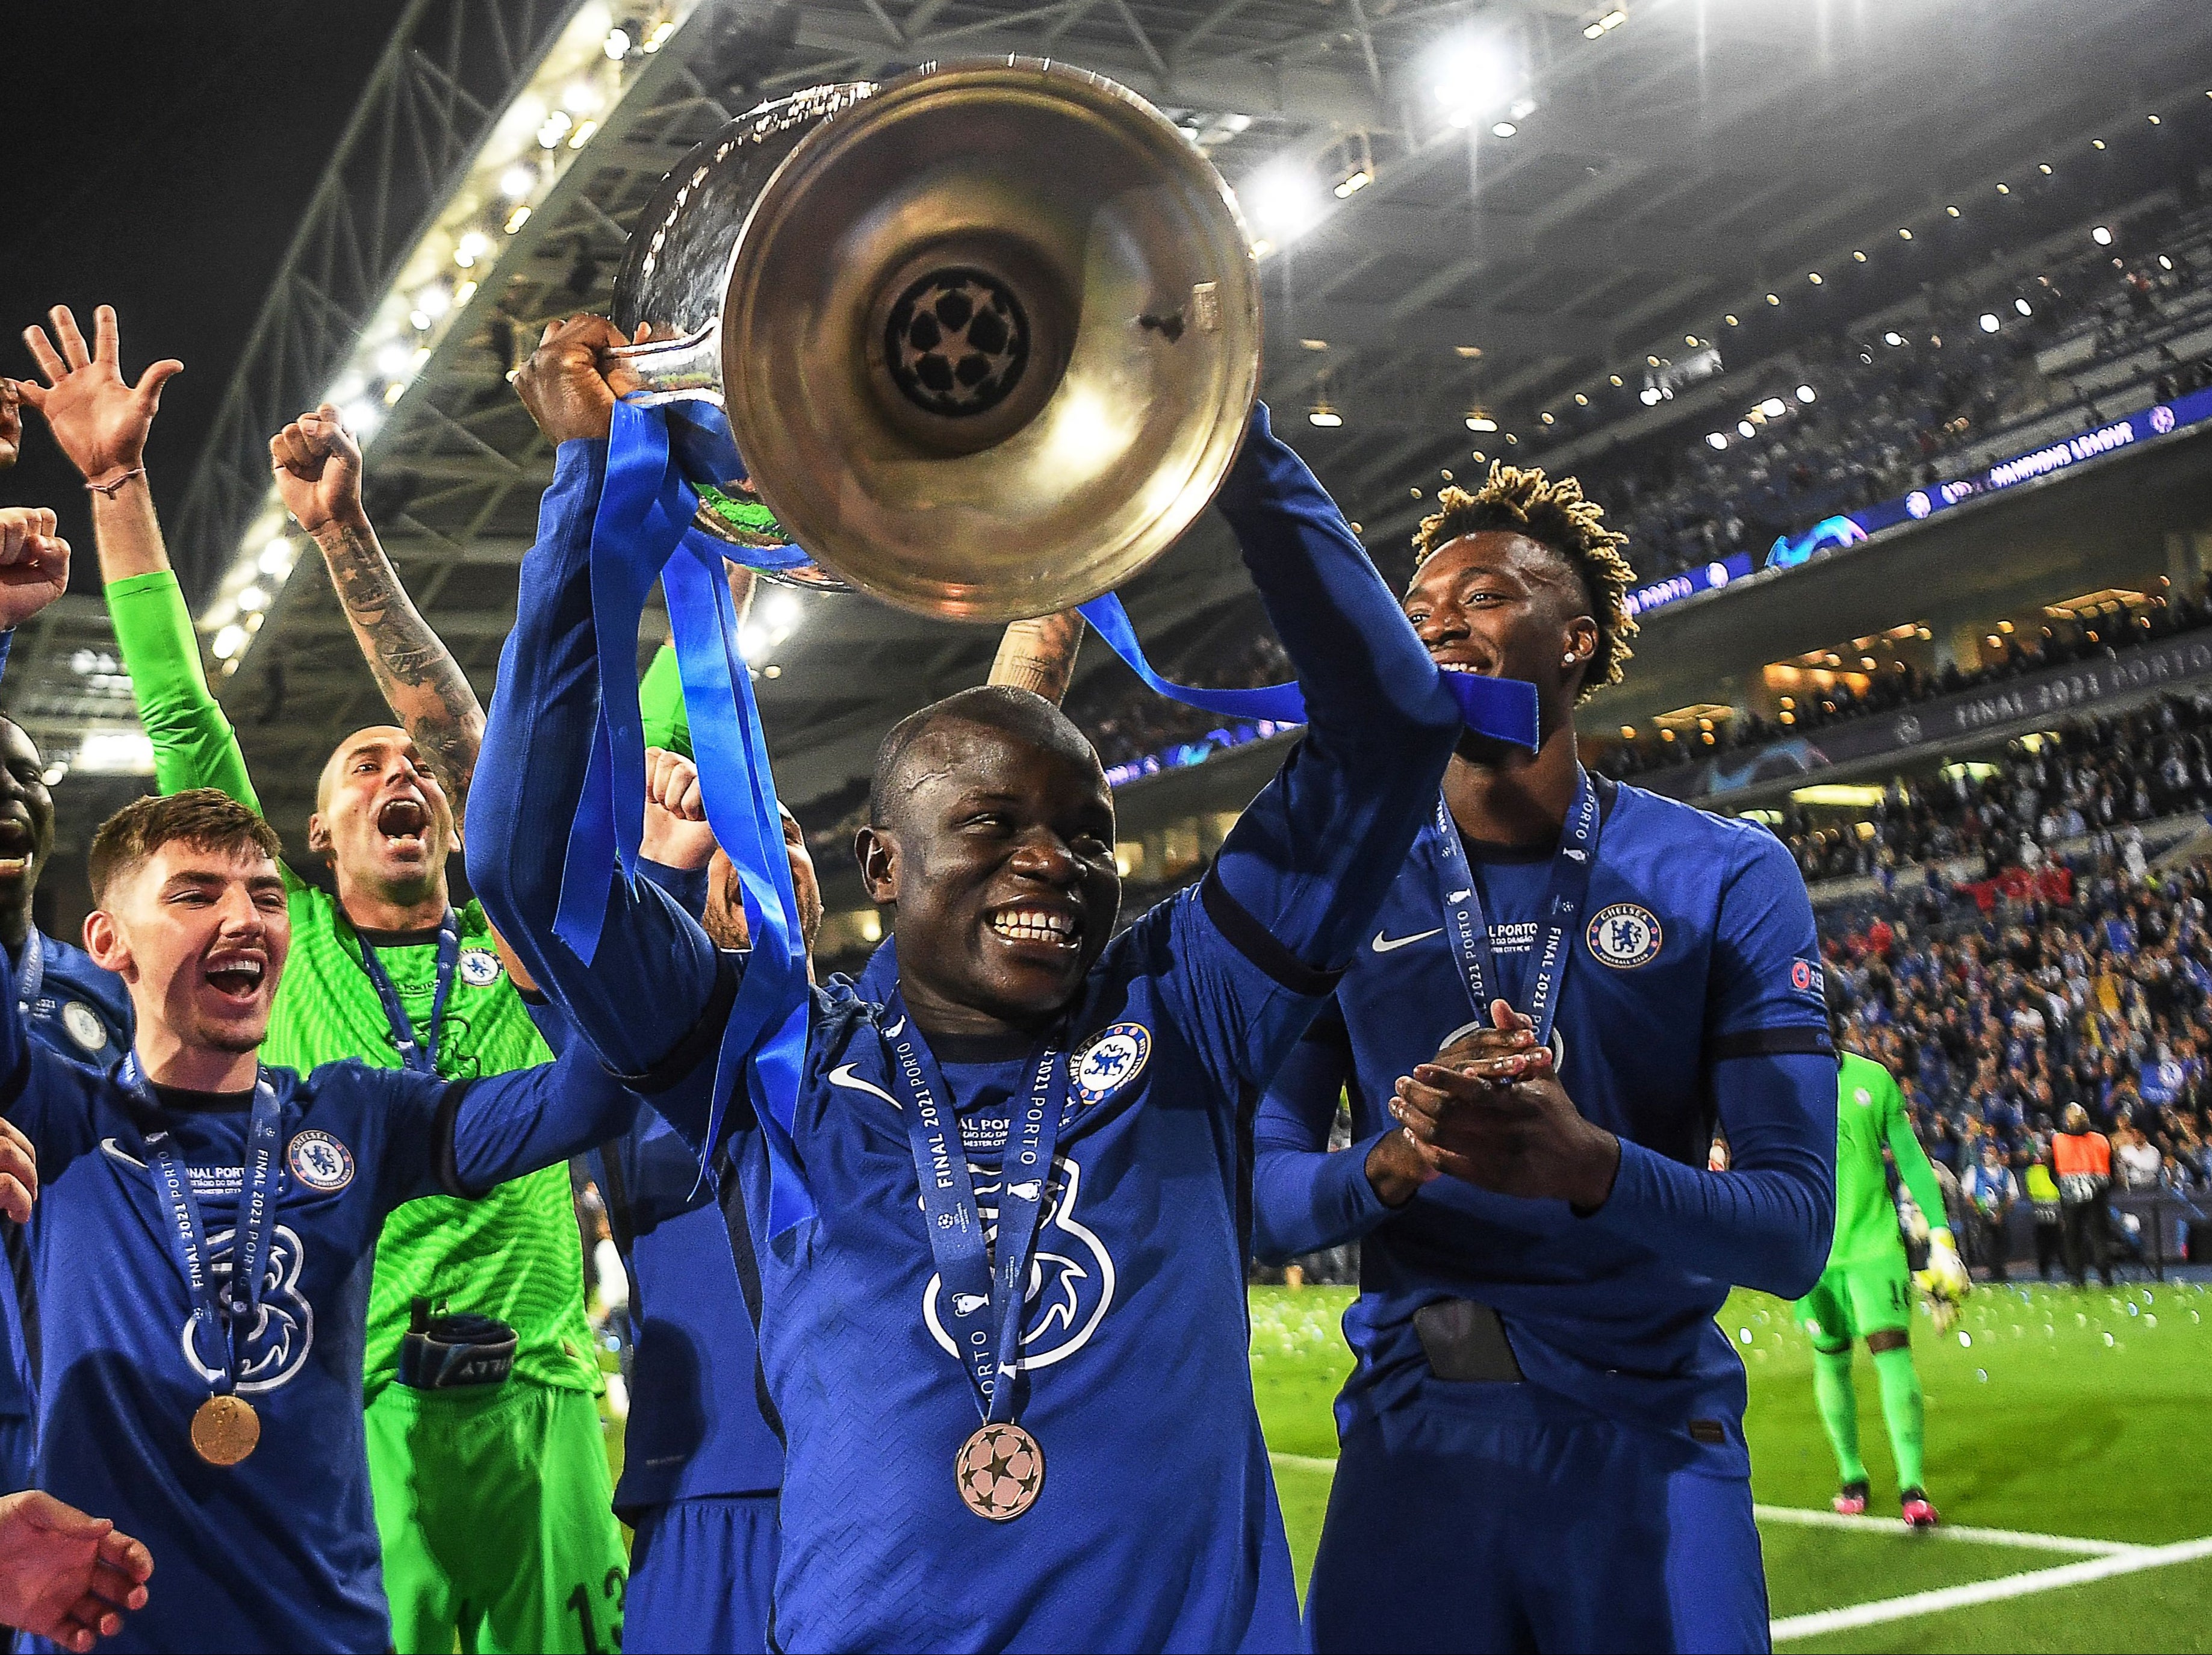 N’Golo Kante rarely allows himself to be the centre of attention – even though his performances warrant it